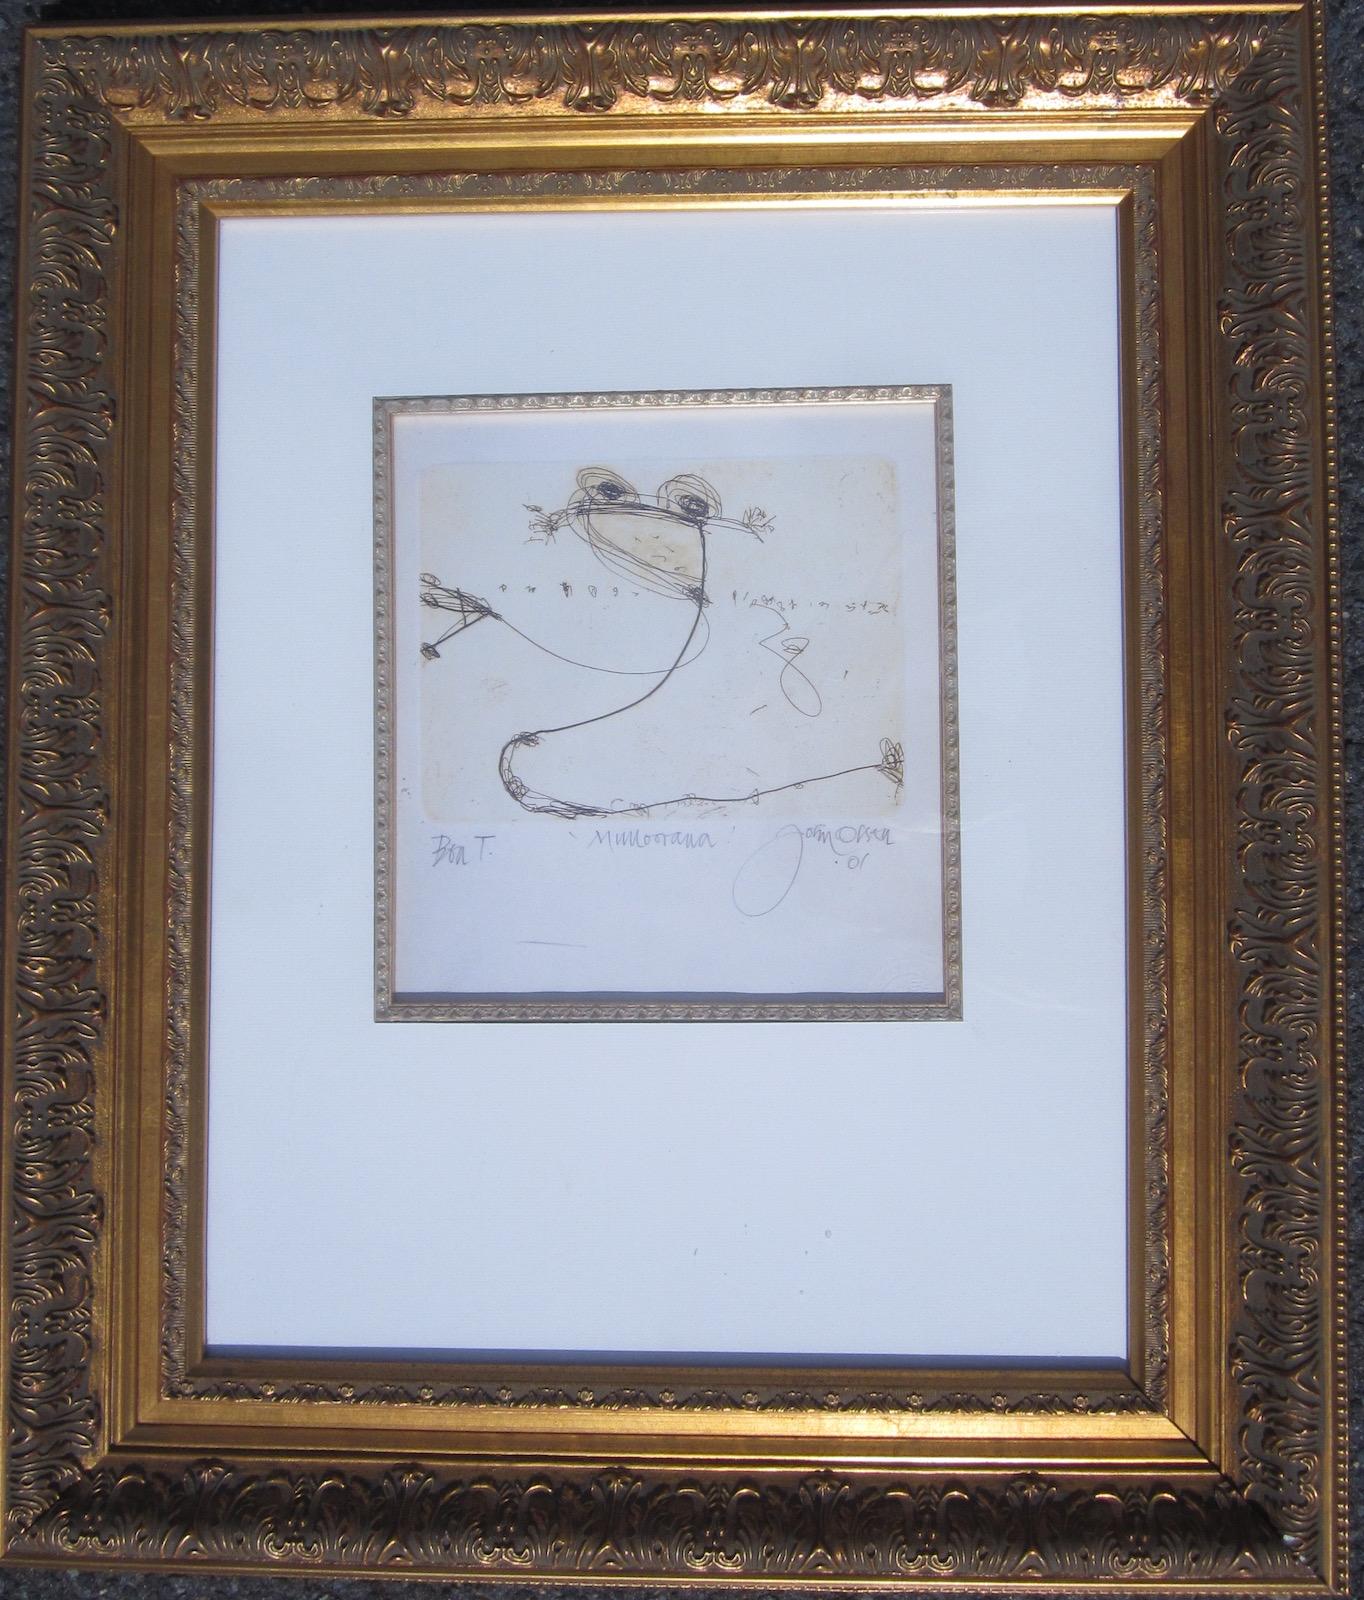 John Olsen (1928 -), etching, signed and dated '01 bottom right,
Measure: image 23 x 25cm,
frame 57 x 69cm.
John Olsen is one of Australia’s greatest living artists. Born in Newcastle NSW in 1928, Olsen is well known for his energetic and